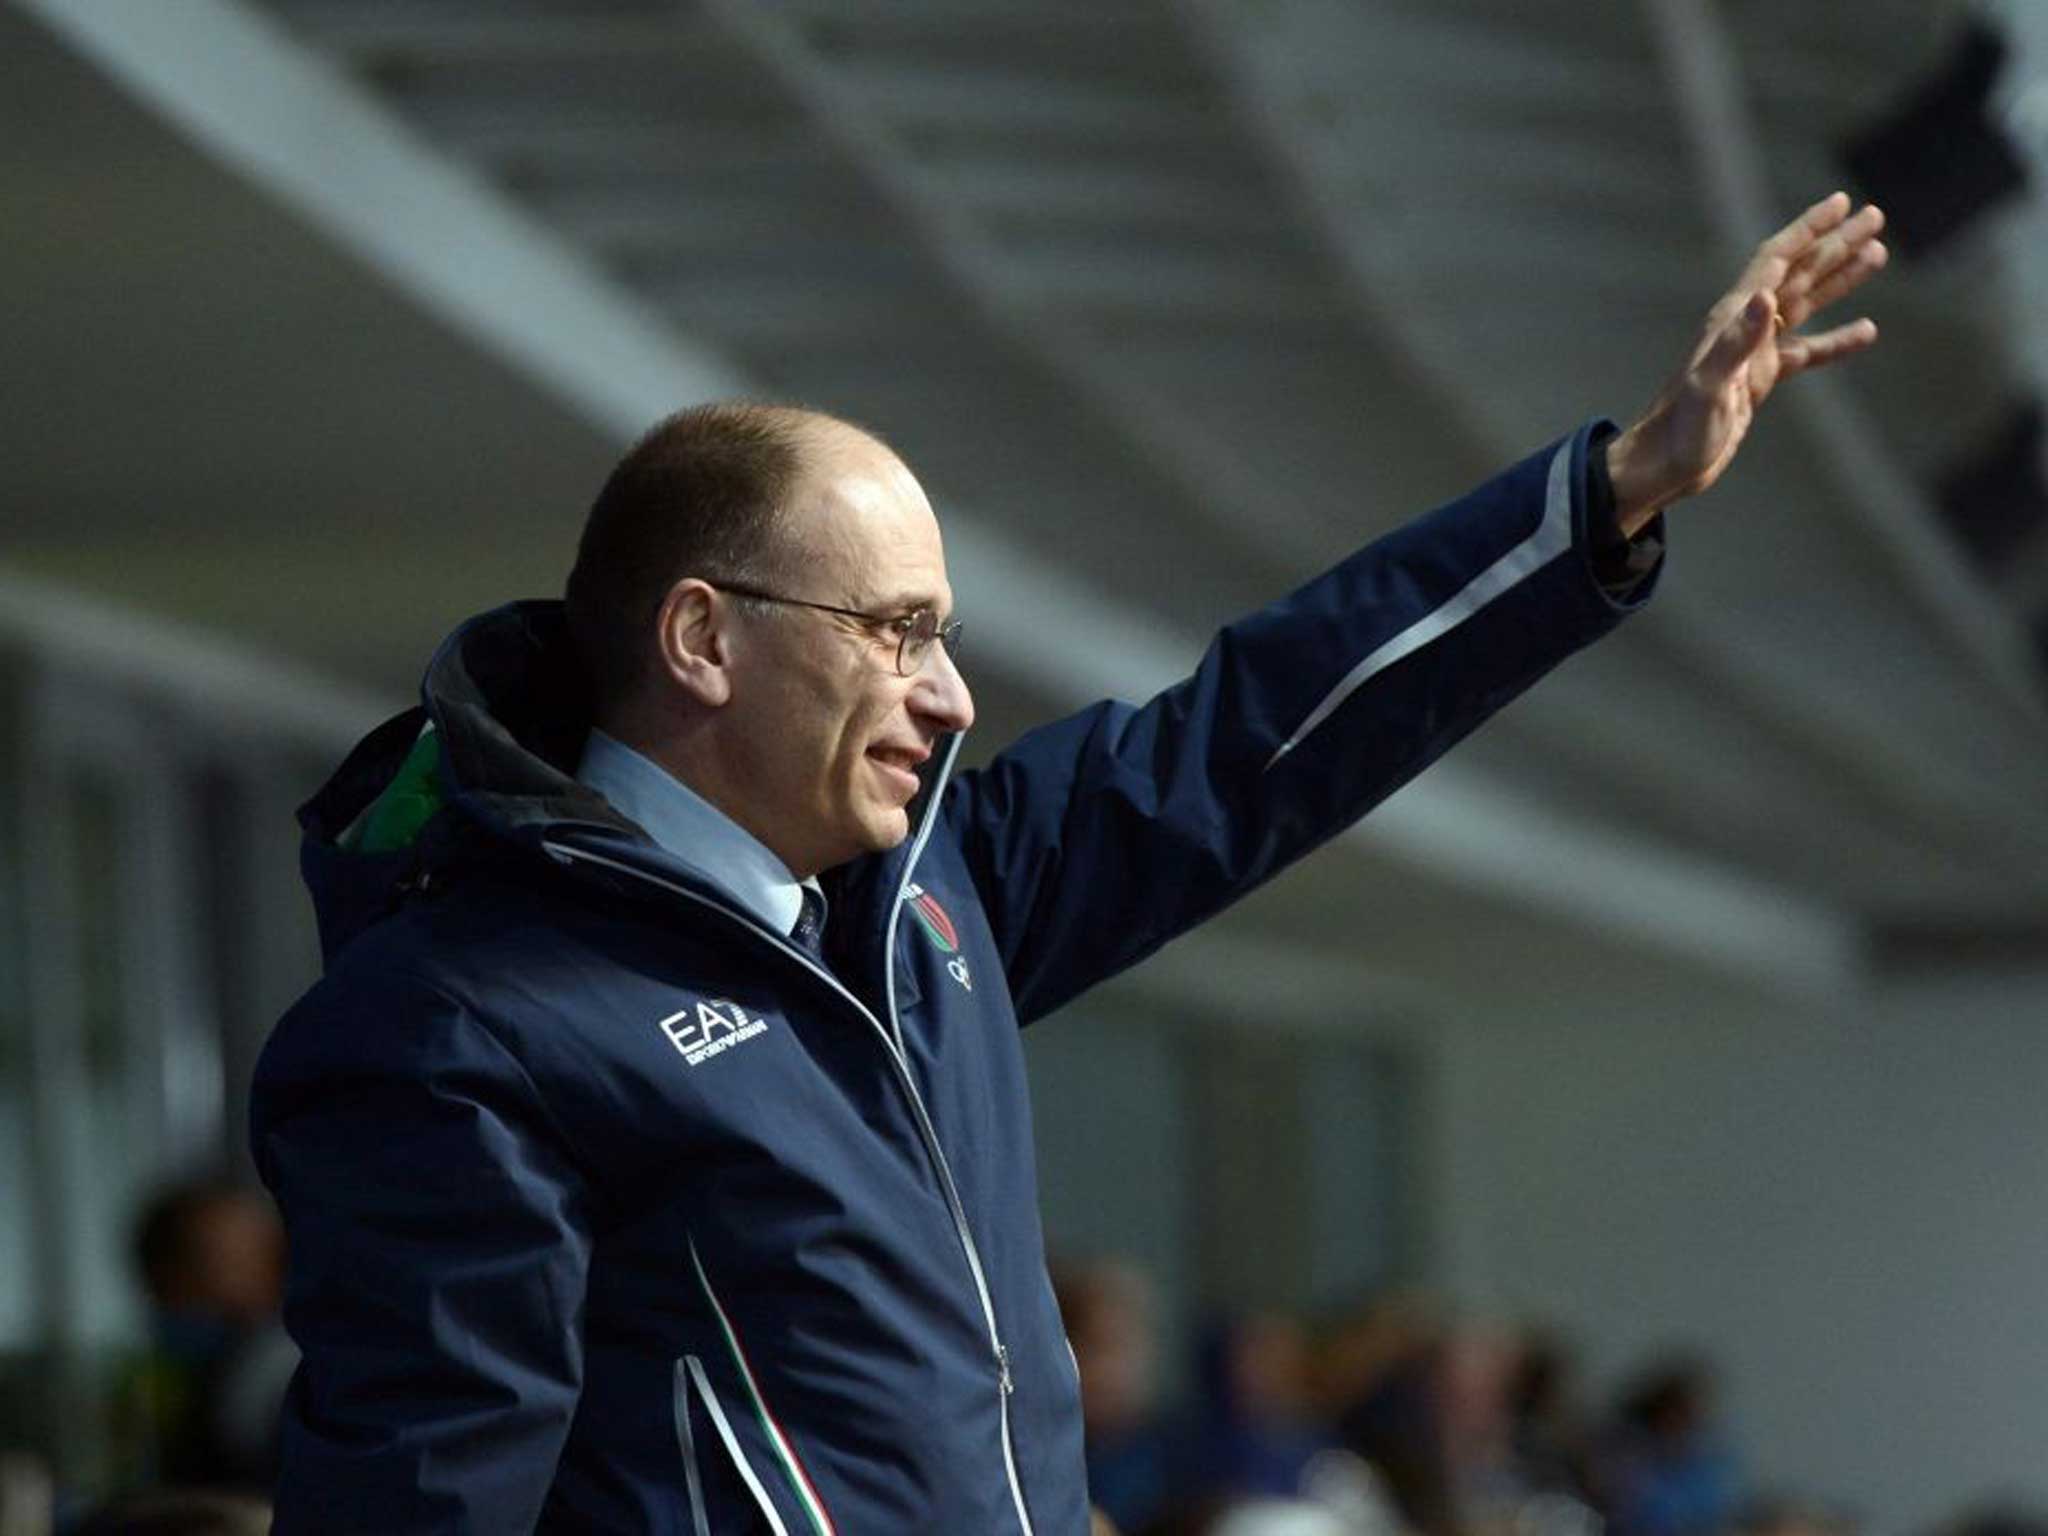 Enrico Letta at the Winter Games in Sochi, where he says he will press the authorities on human rights